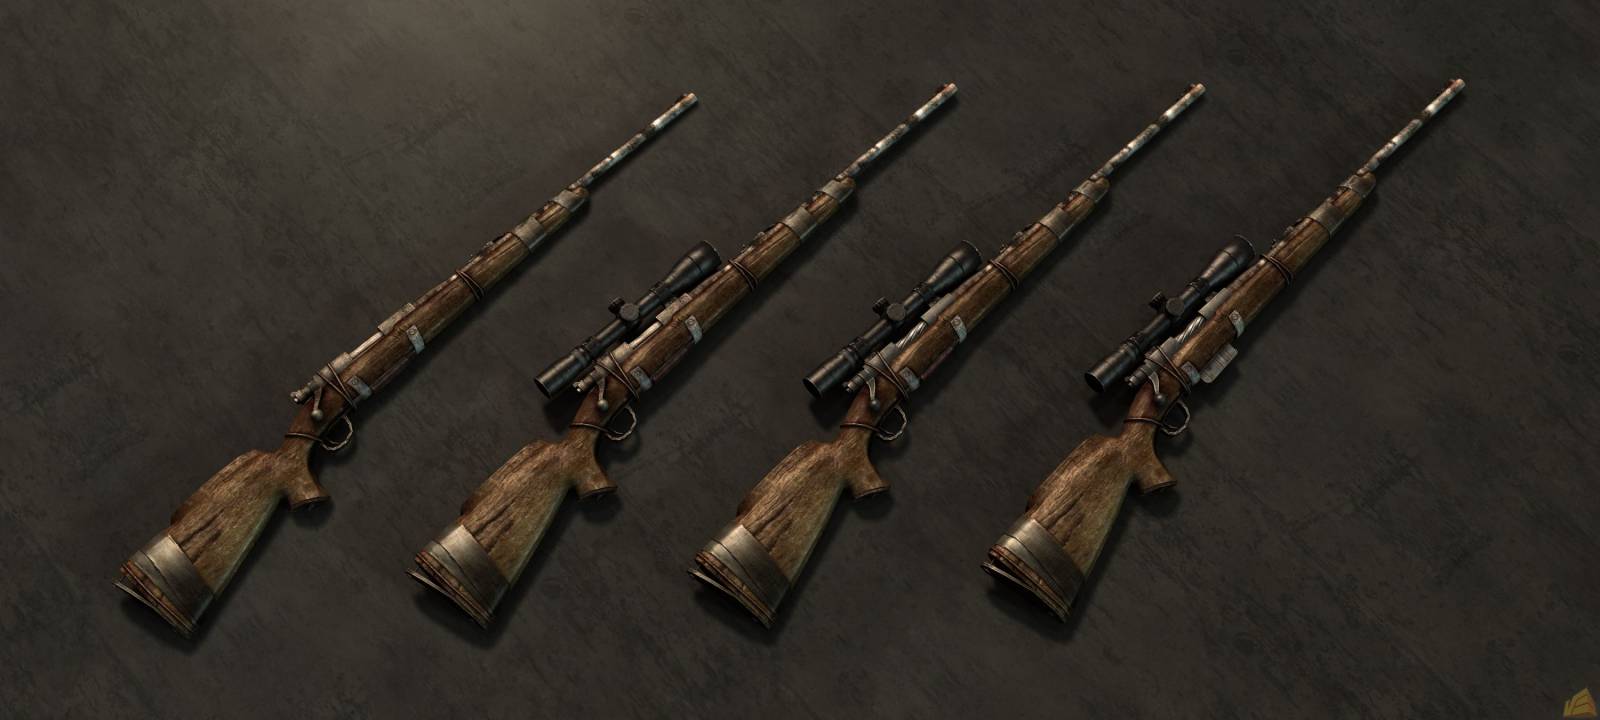 Fallout 4 weapons from new vegas фото 83